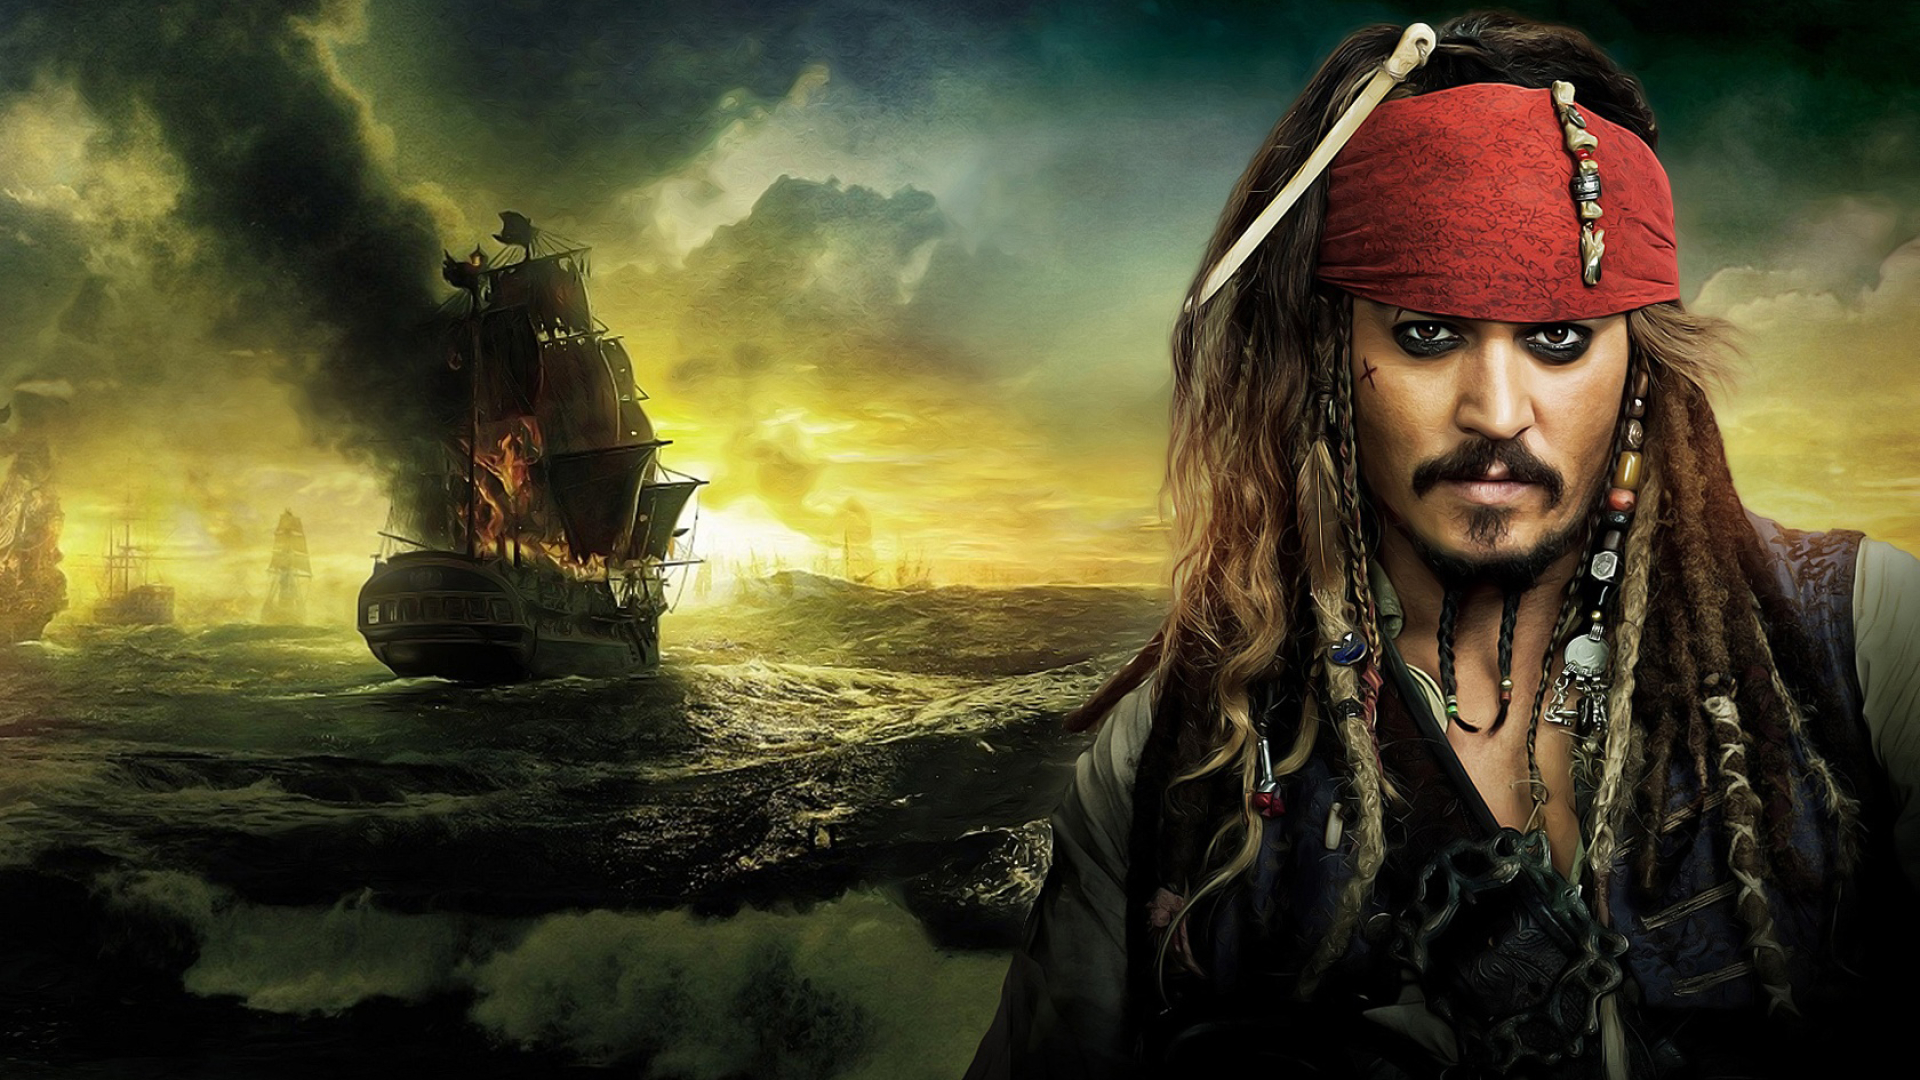 1920x1080 Resolution Johnny Depp in pirates of the caribbean 1080P